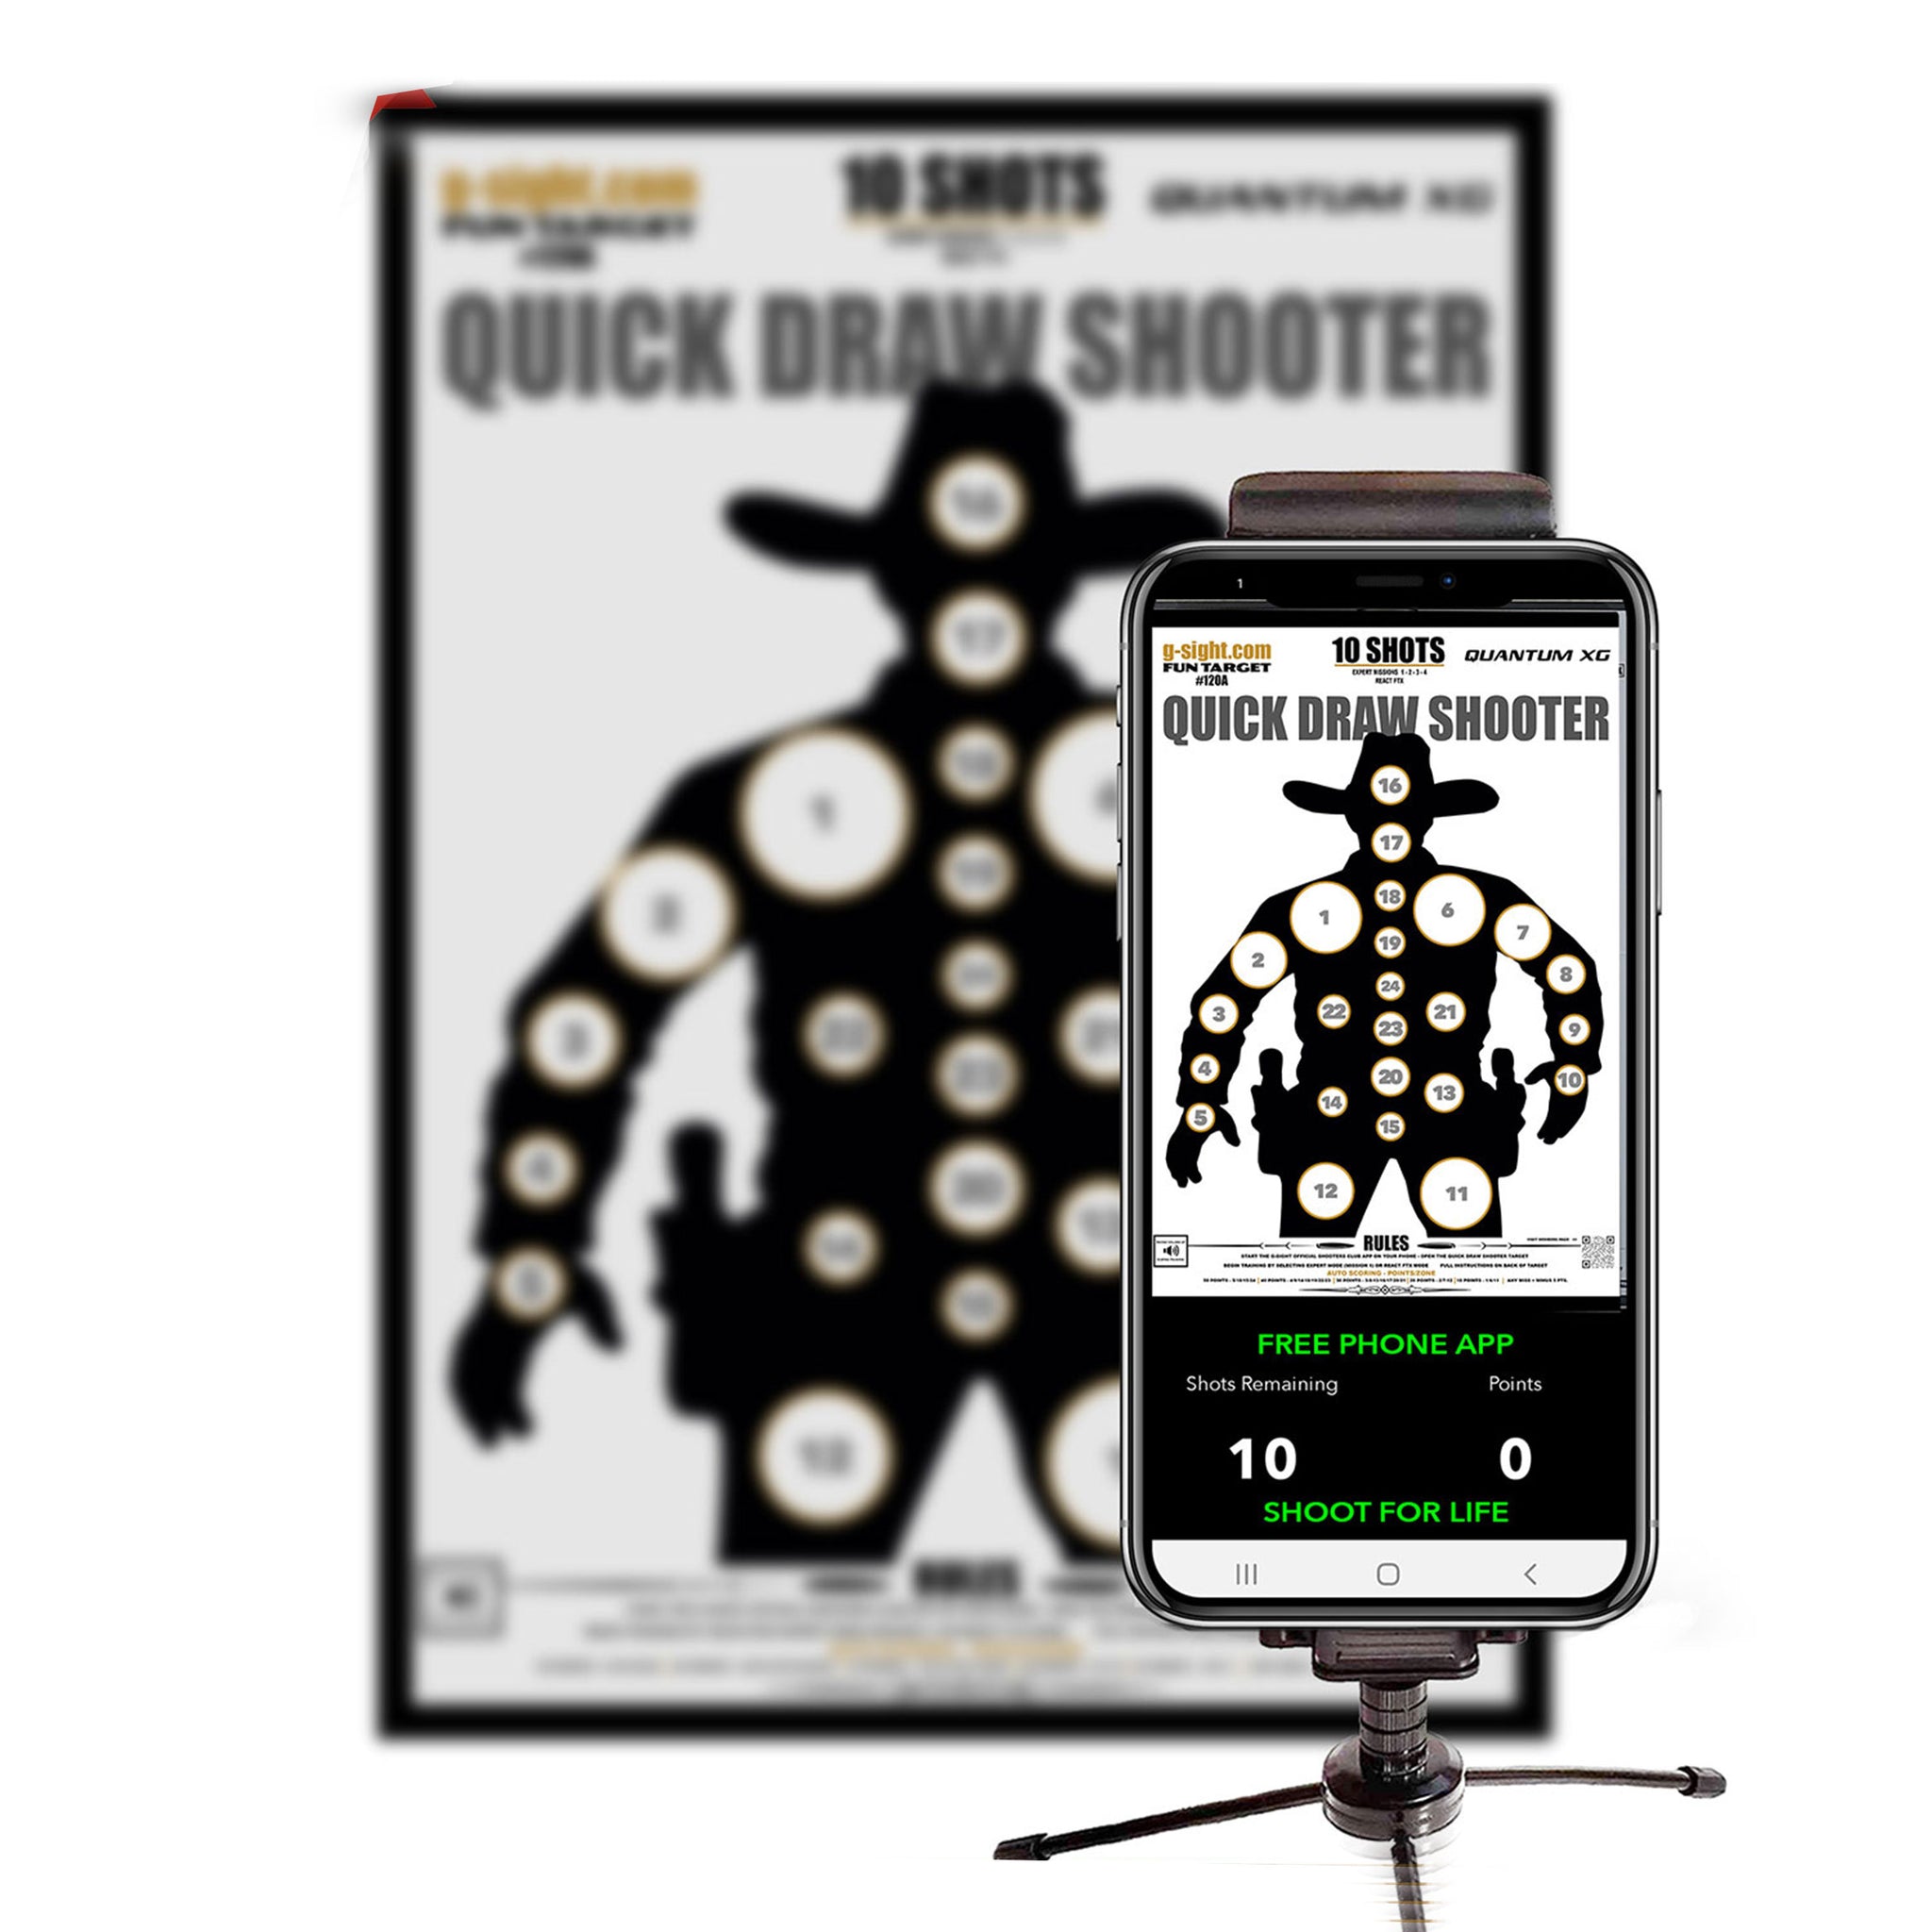 QUICK DRAW SHOOTER - Shoot For Life Mobile App Target